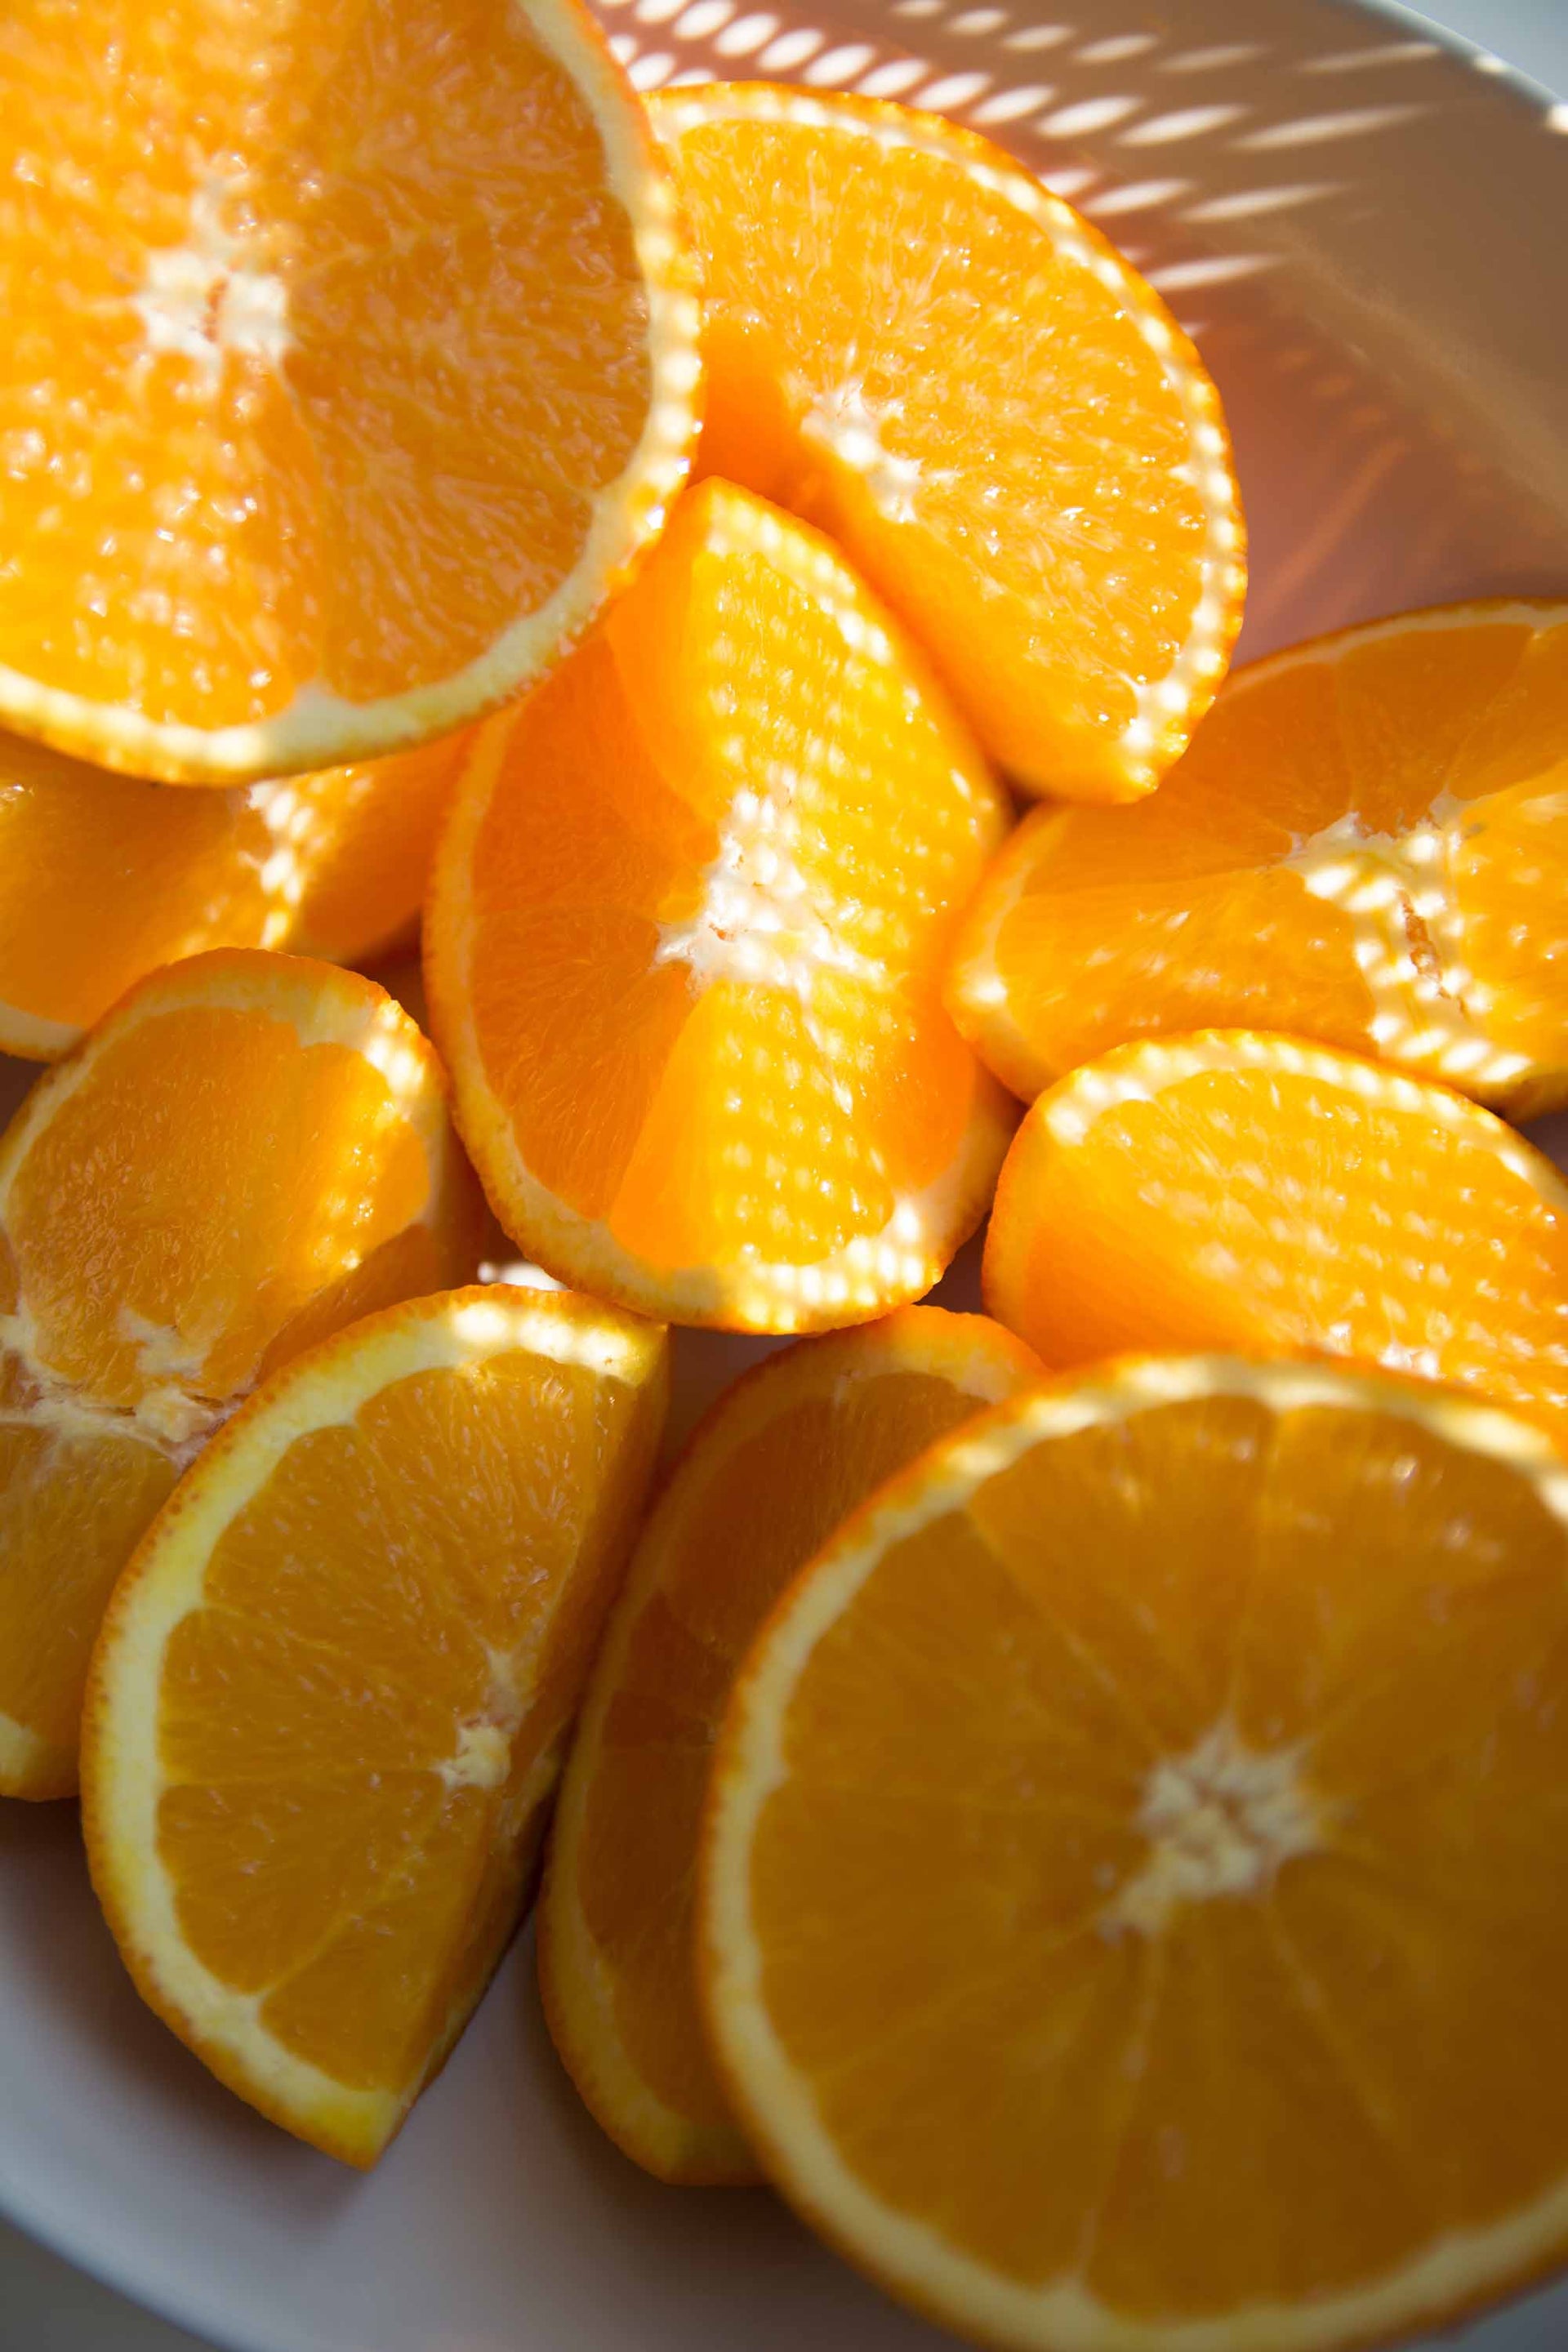 Choosing the vitamin C that’s right for you